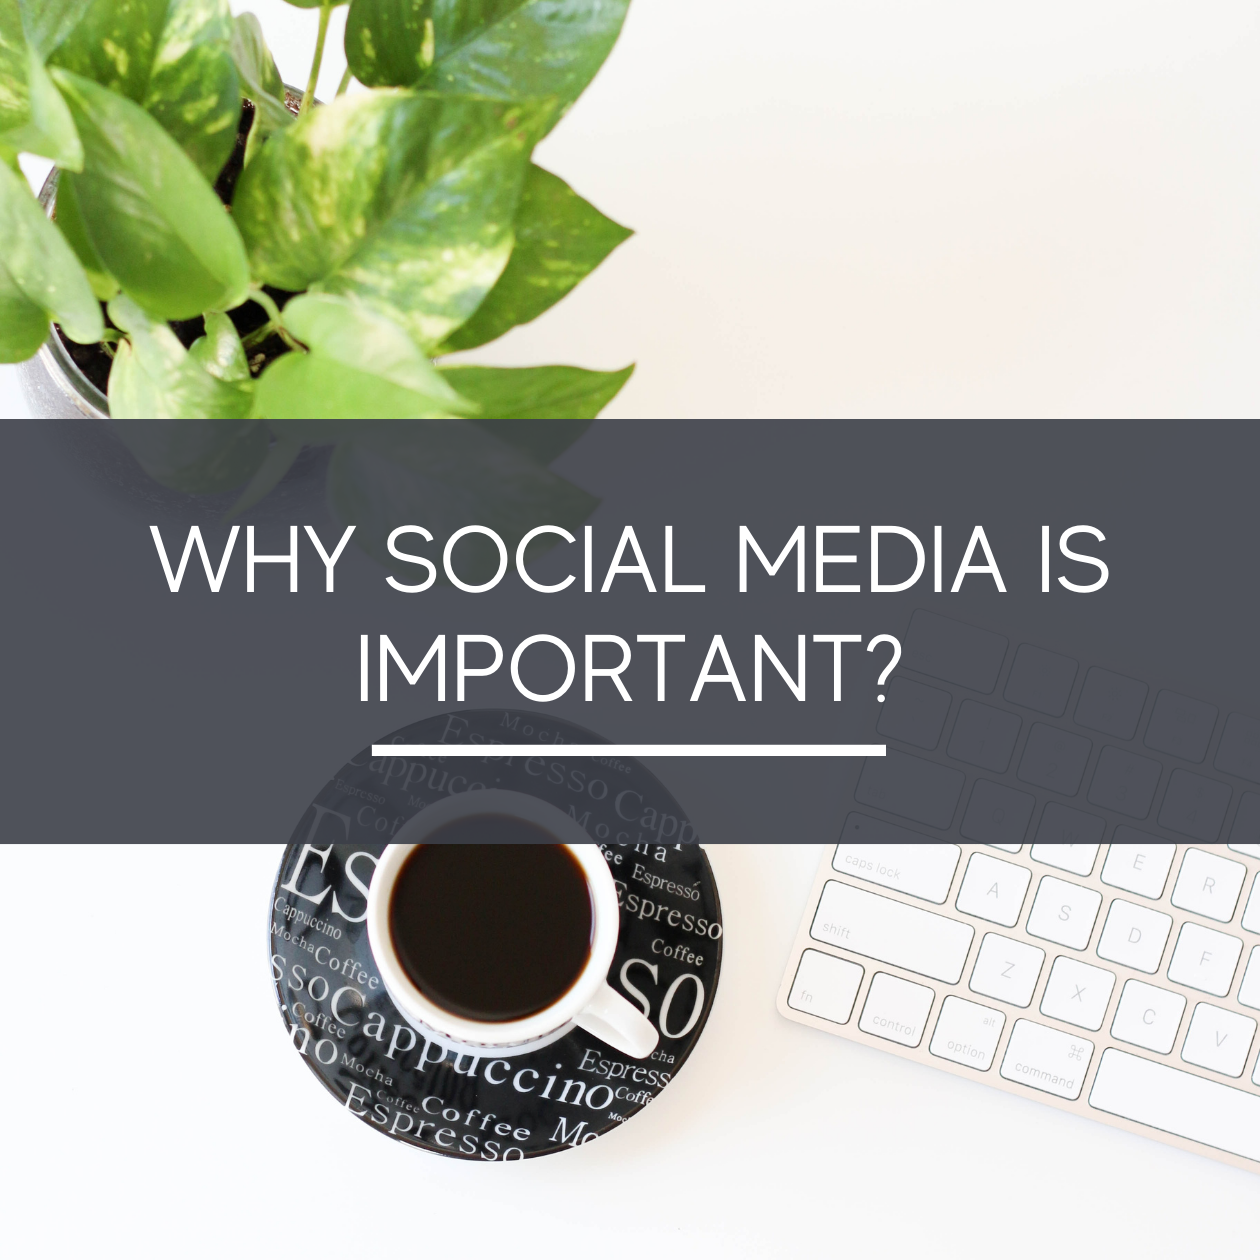 Why is Social Media important?